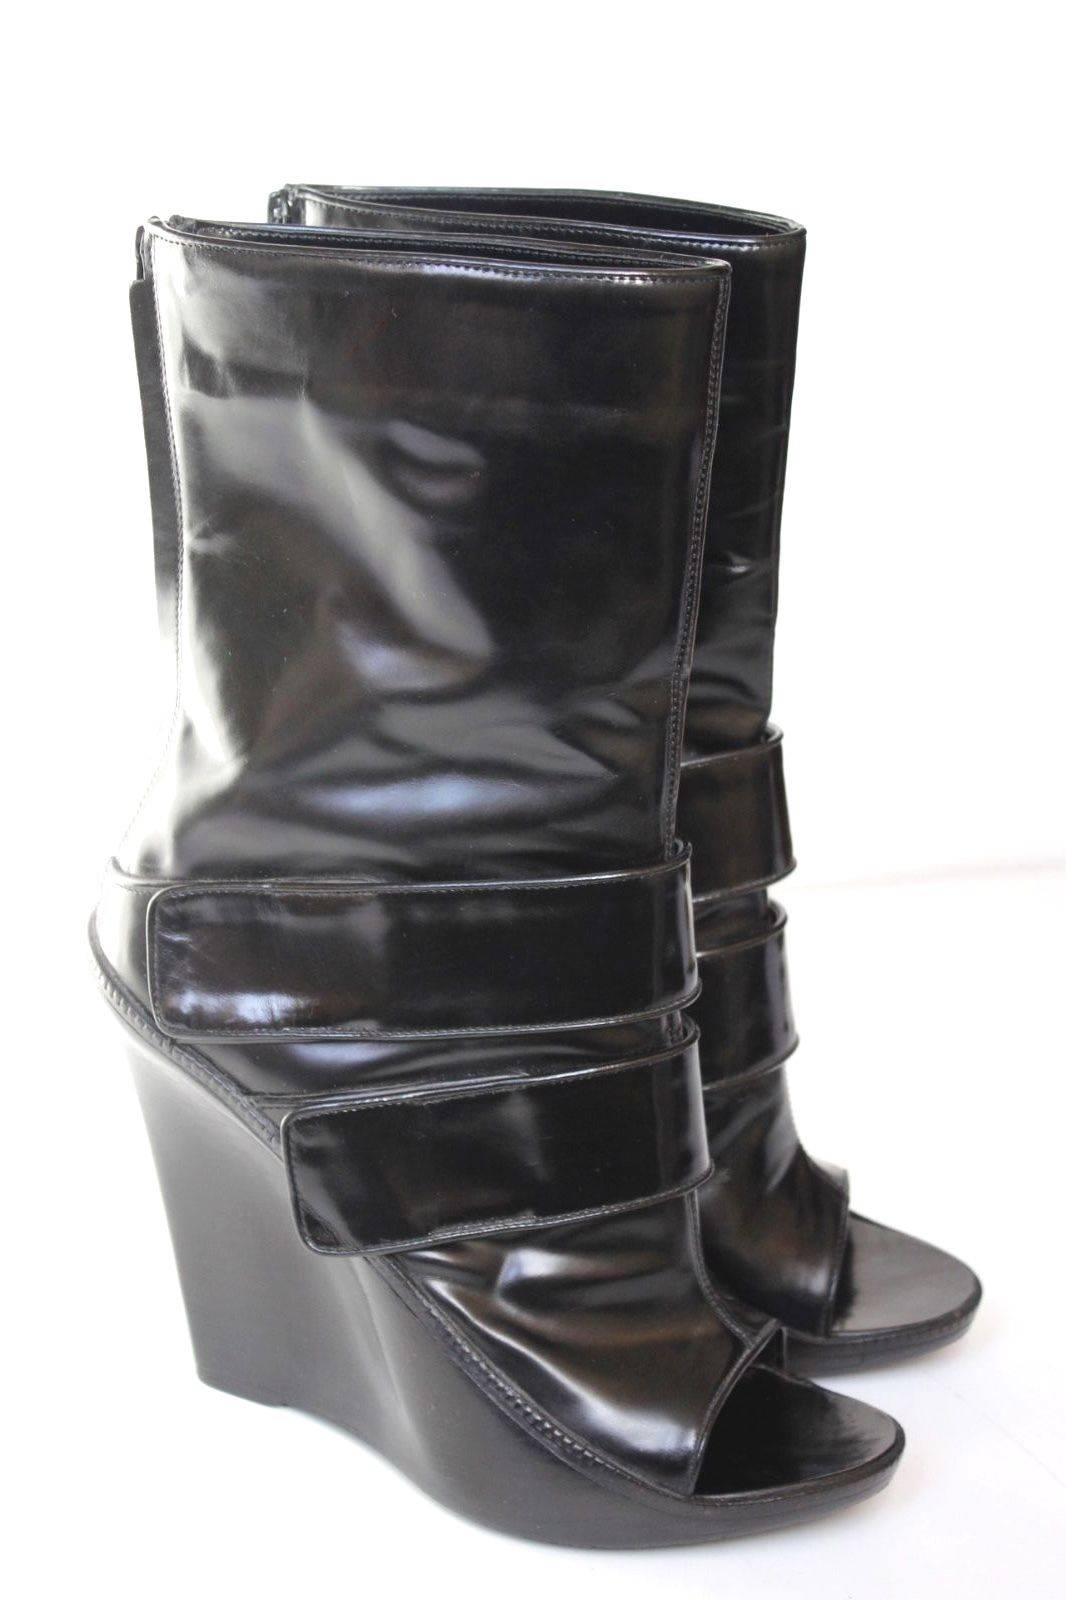 Givenchy Black Patent Leather Wedge Midi Boots 40.5 uk 7.5  In Good Condition For Sale In London, GB